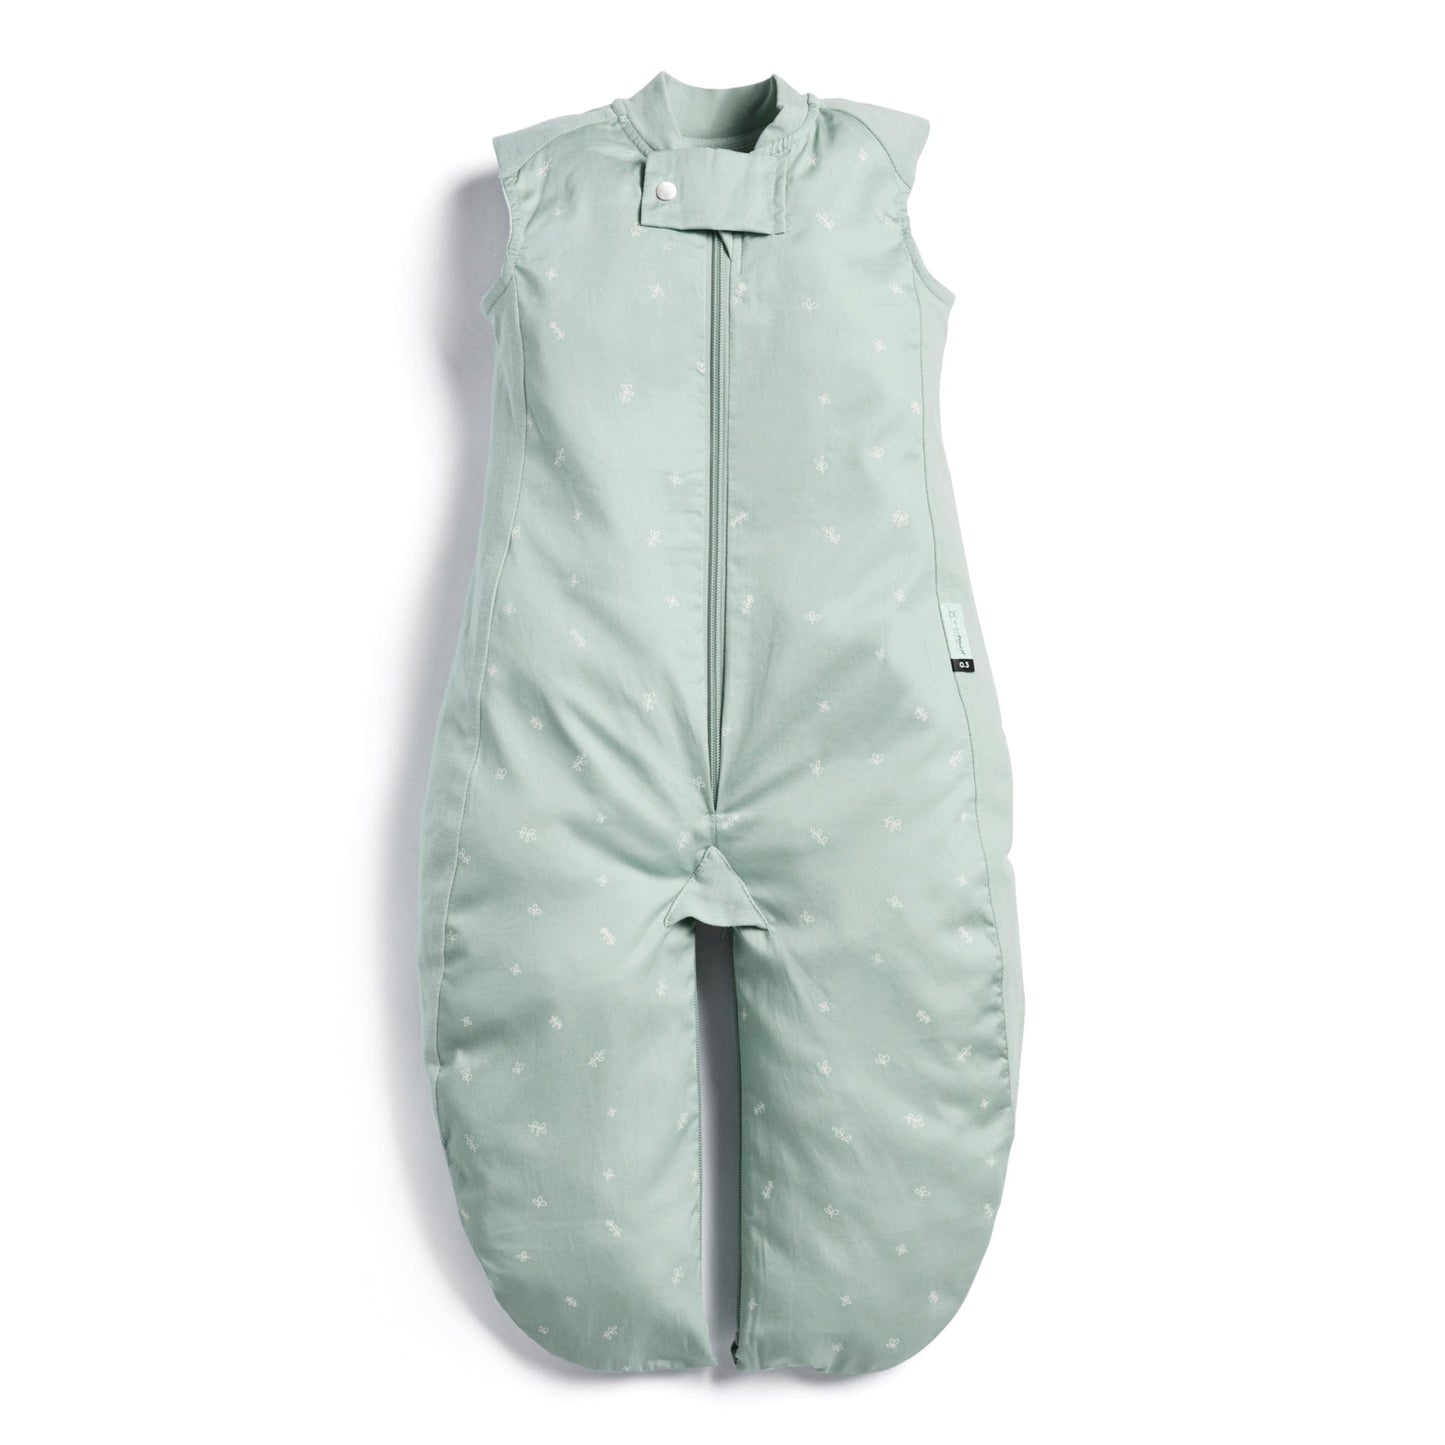 Sleep Suit Bag 0.3 Tog For Kids By ergoPouch - Stylemykid.com